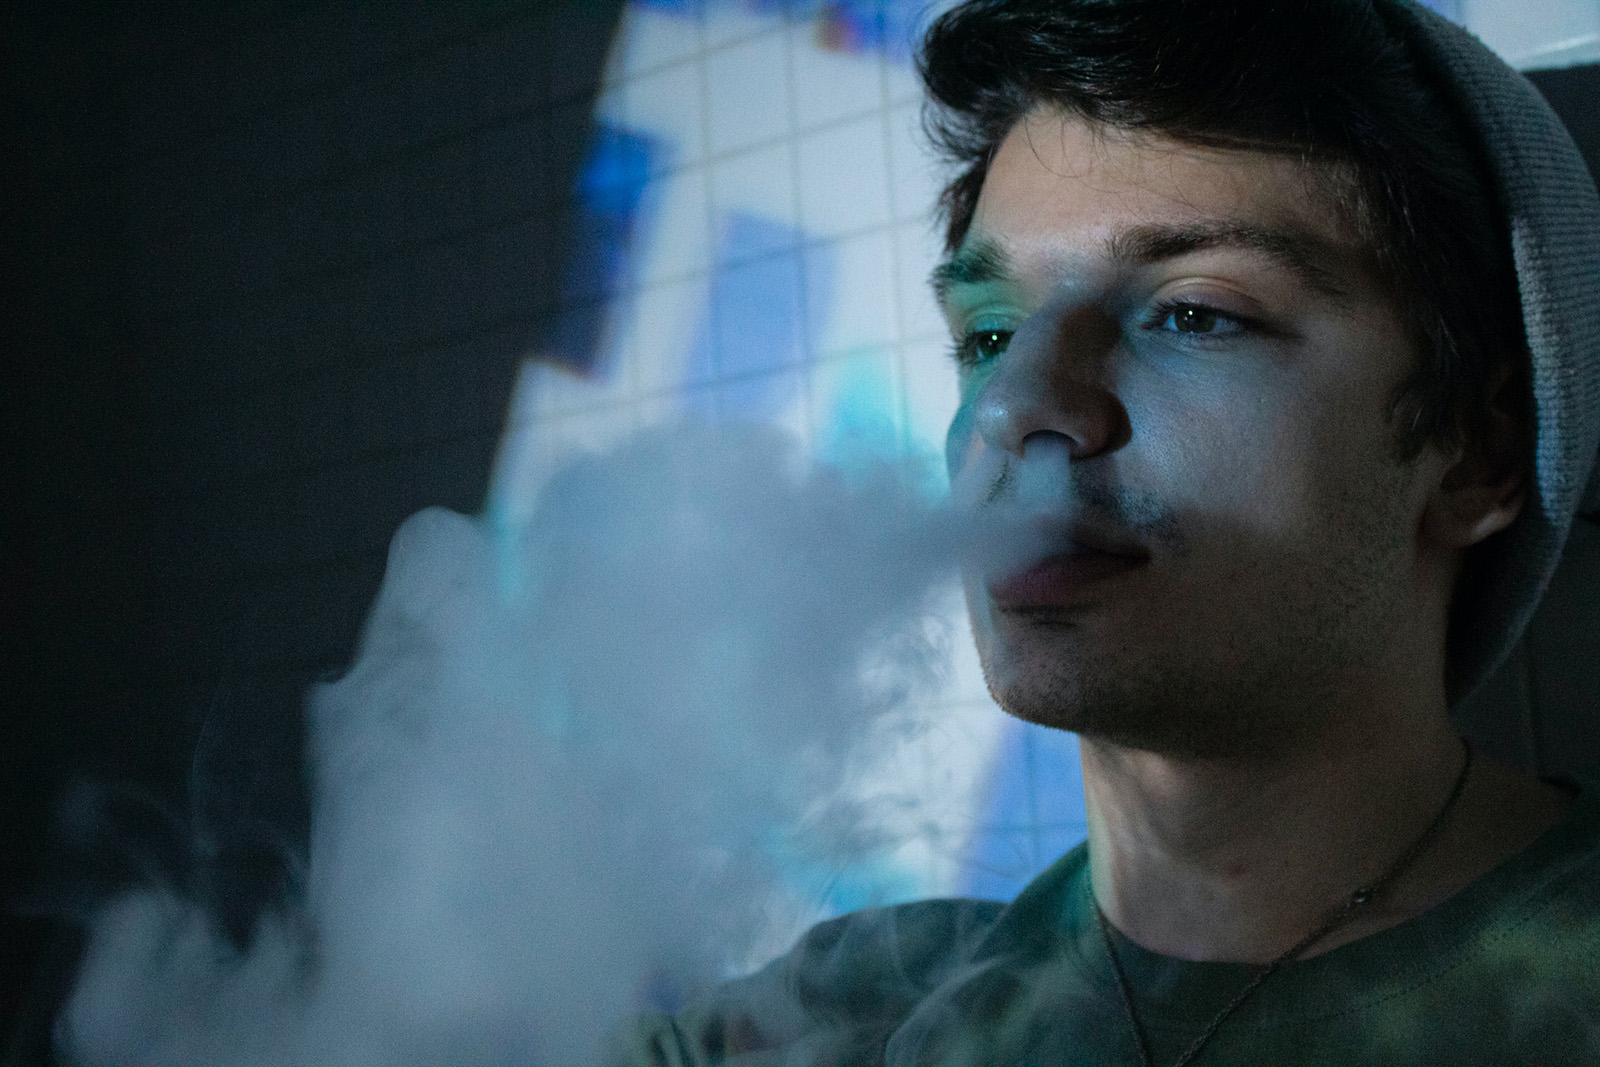 Number of vaping teens falls, but prevention efforts won't stop